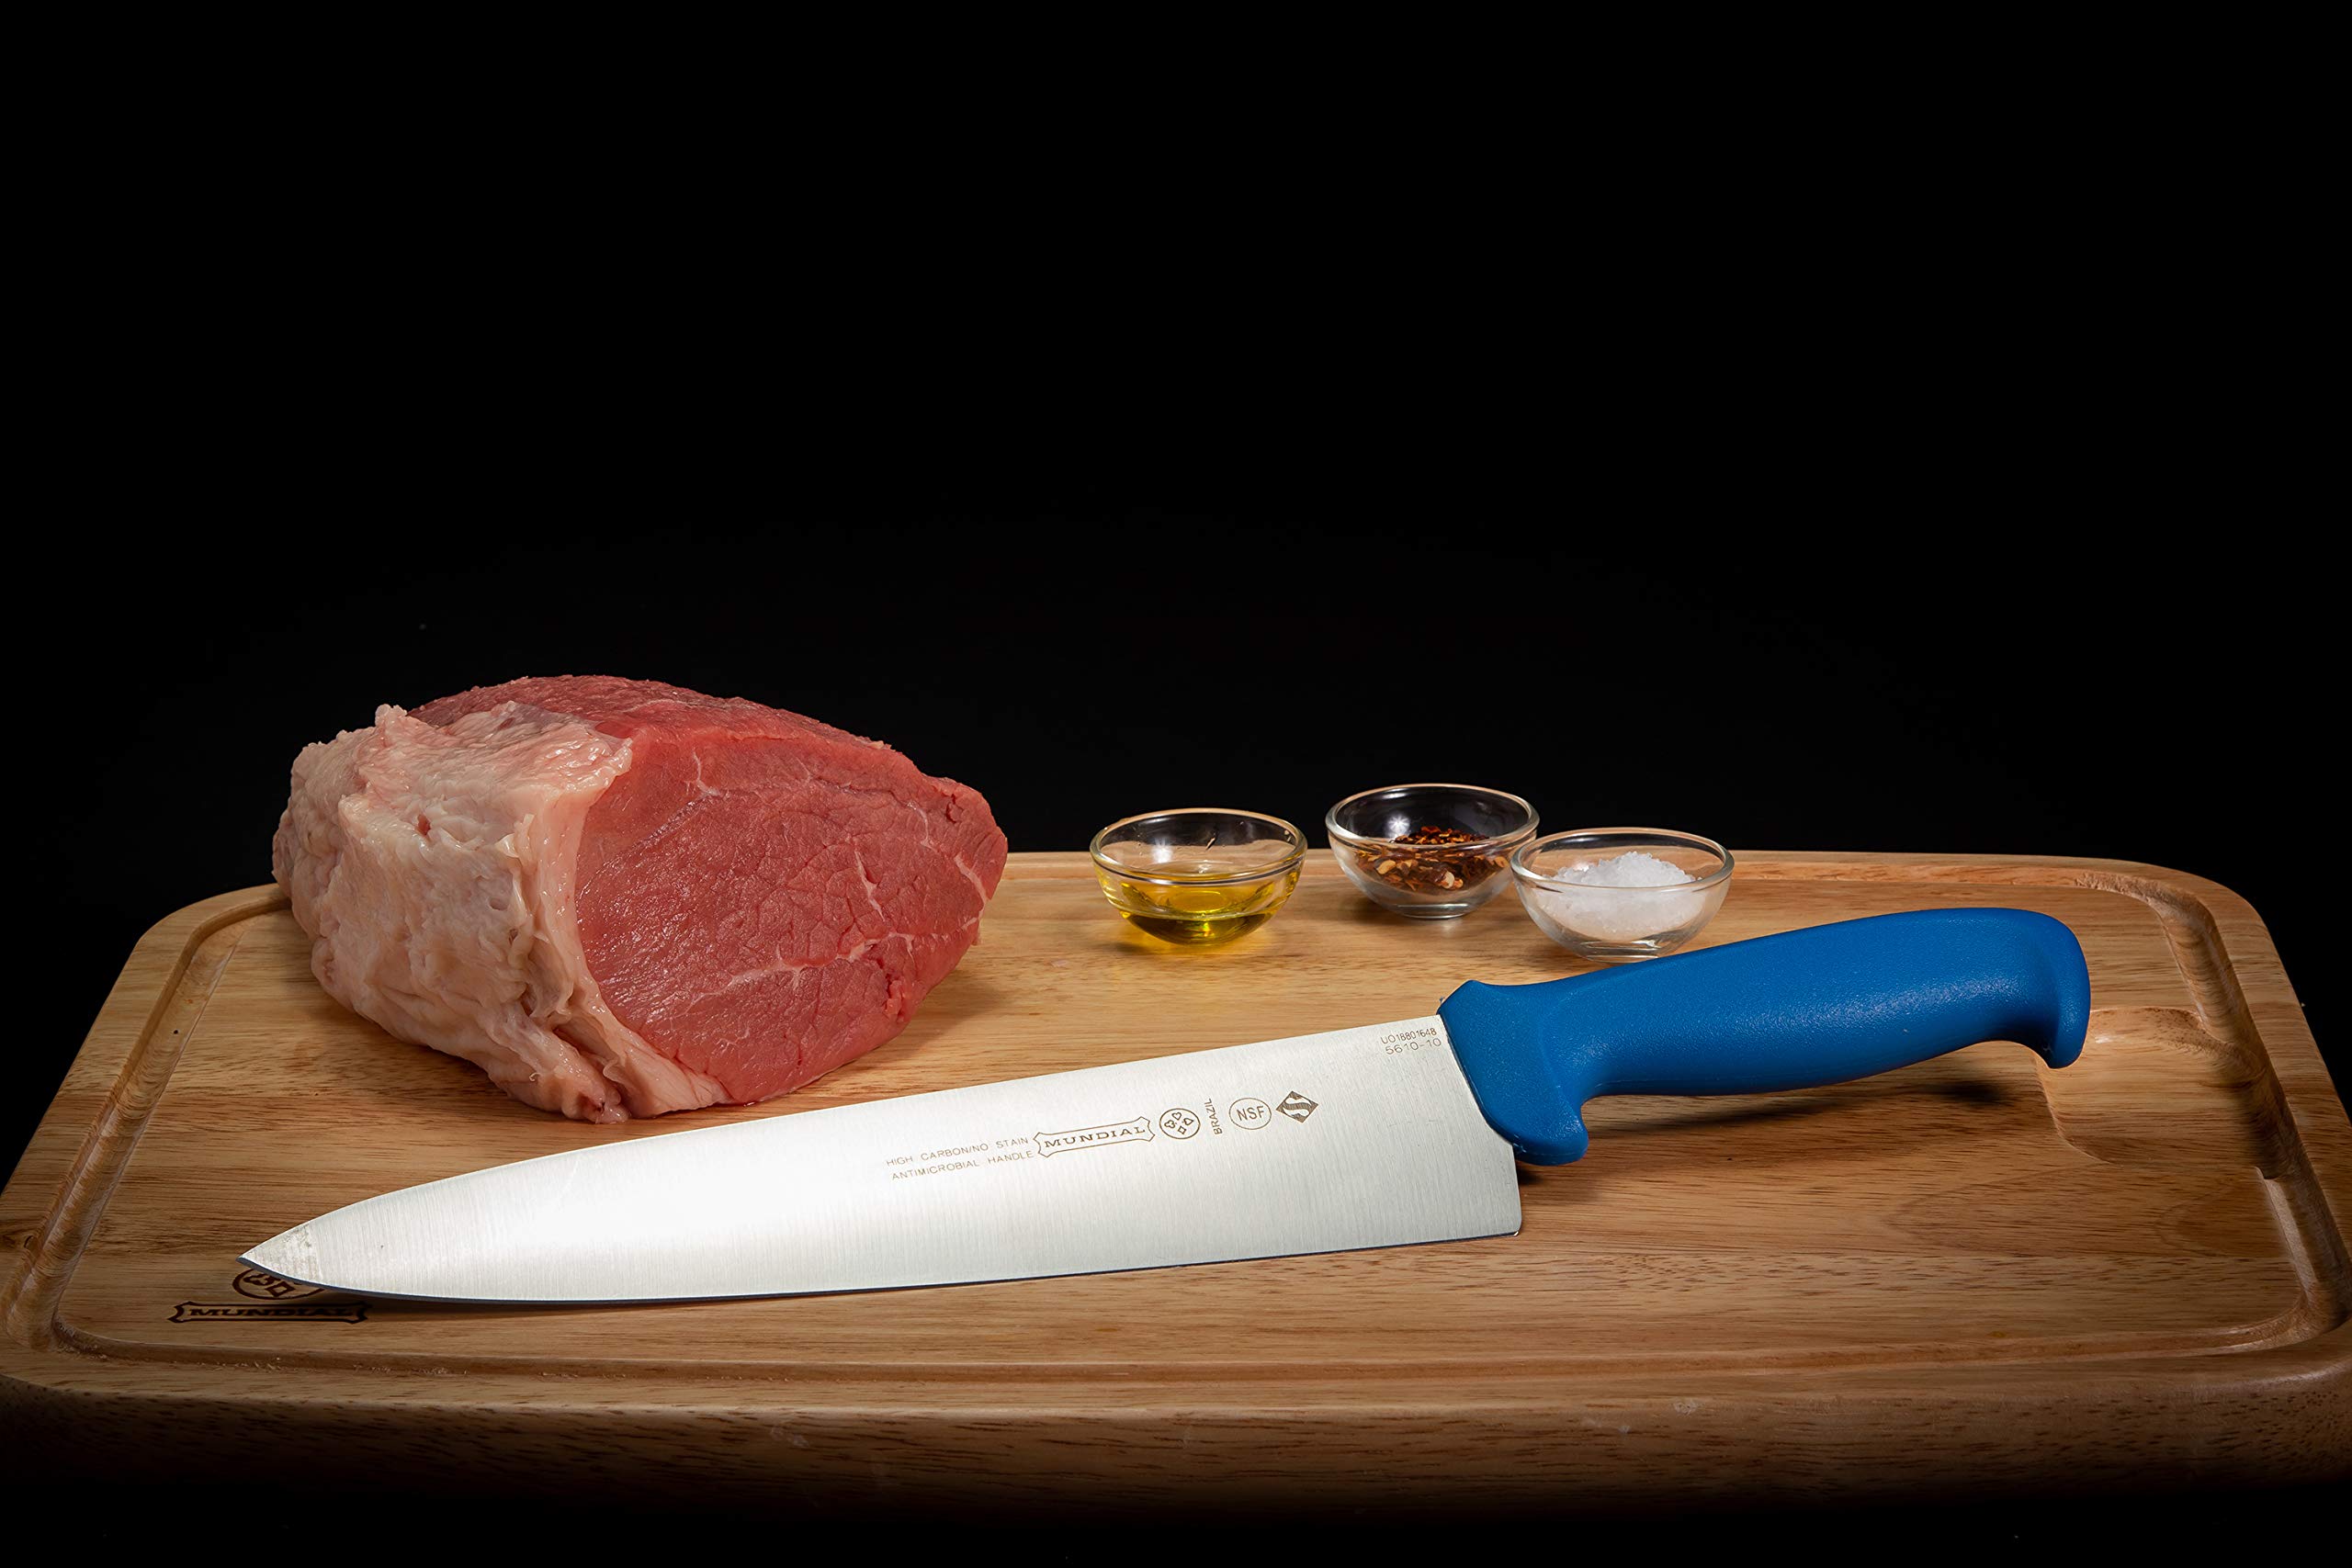 Mundial Blue 5600 Series 10 in Cook or Chef's Knife Handle